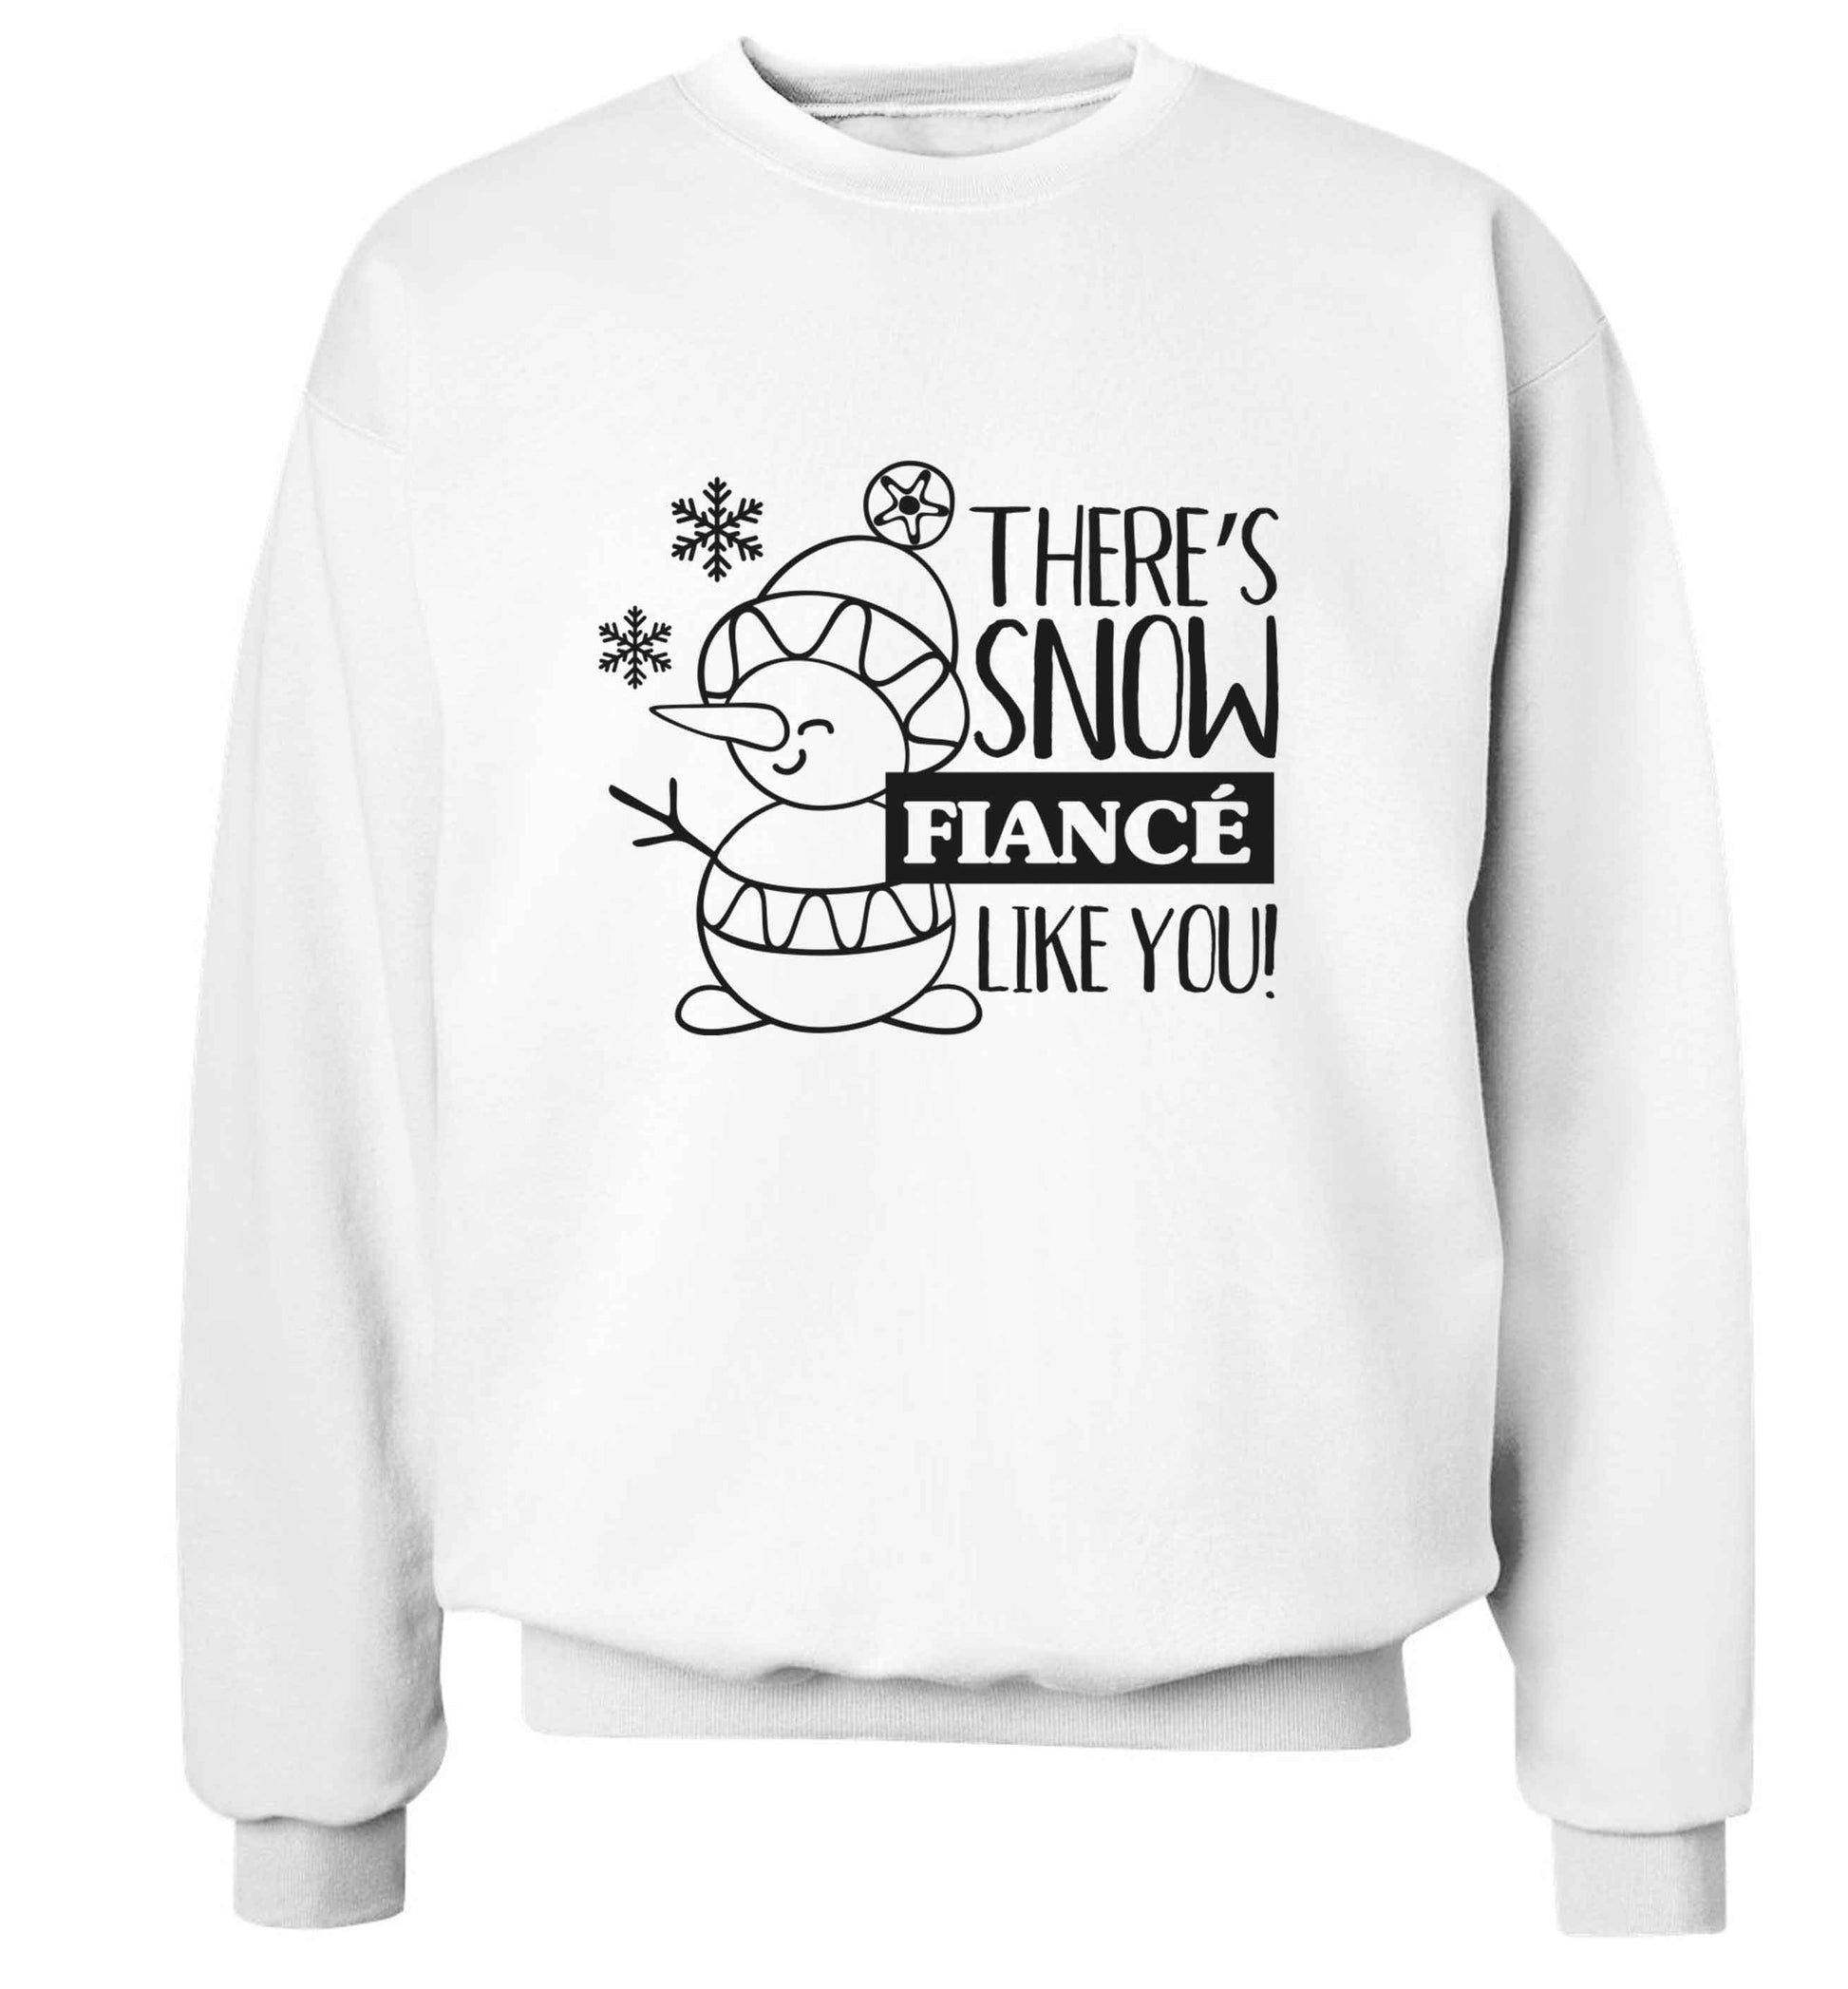 There's snow fiance like you adult's unisex white sweater 2XL